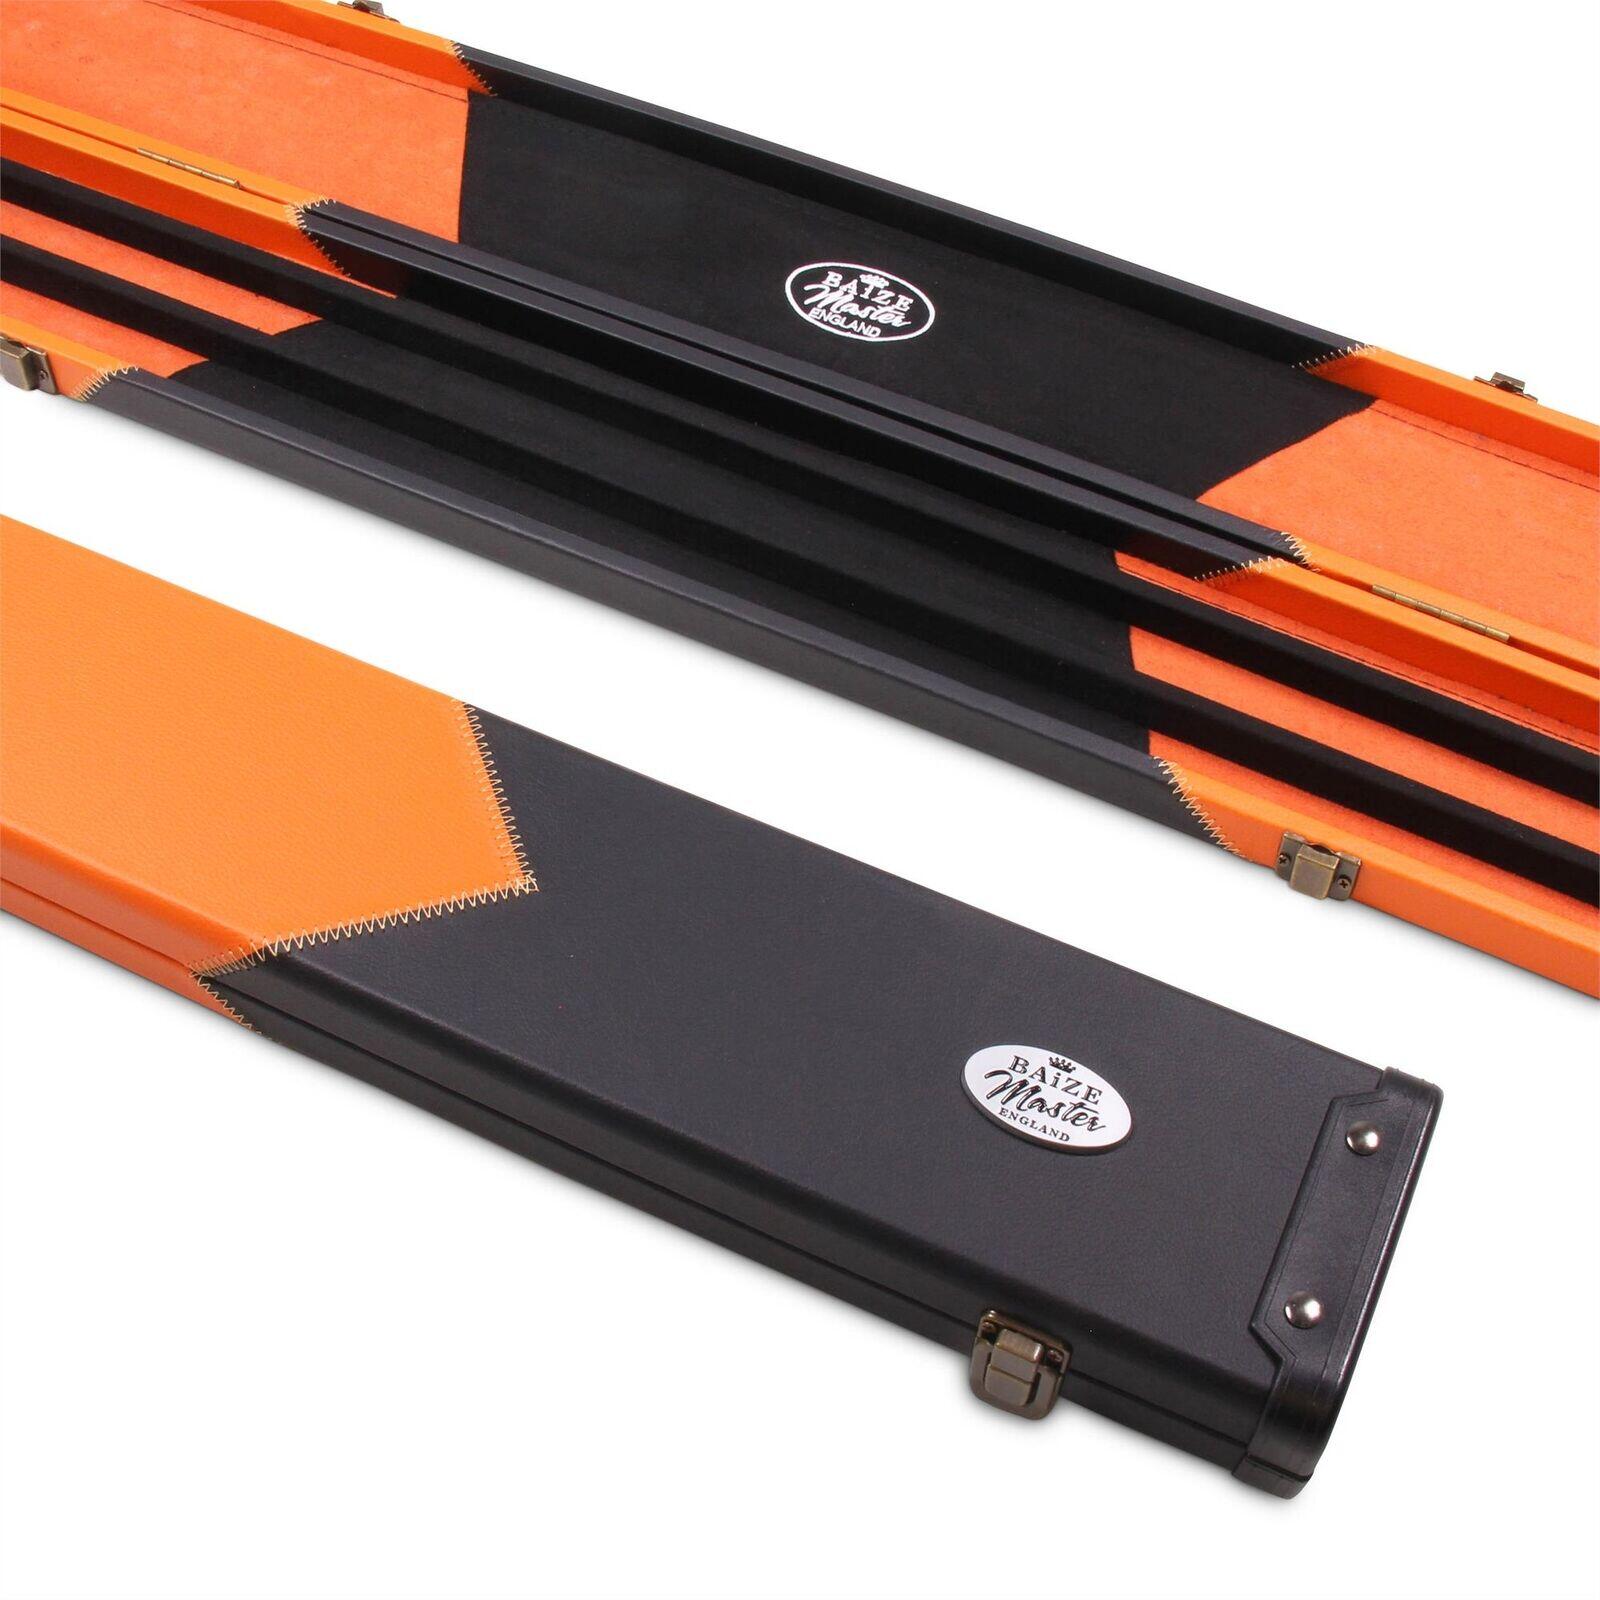 FUNKY CHALK Baize Master 1 Piece WIDE ORANGE ARROW Snooker Pool Cue Case - Holds 3 Cues